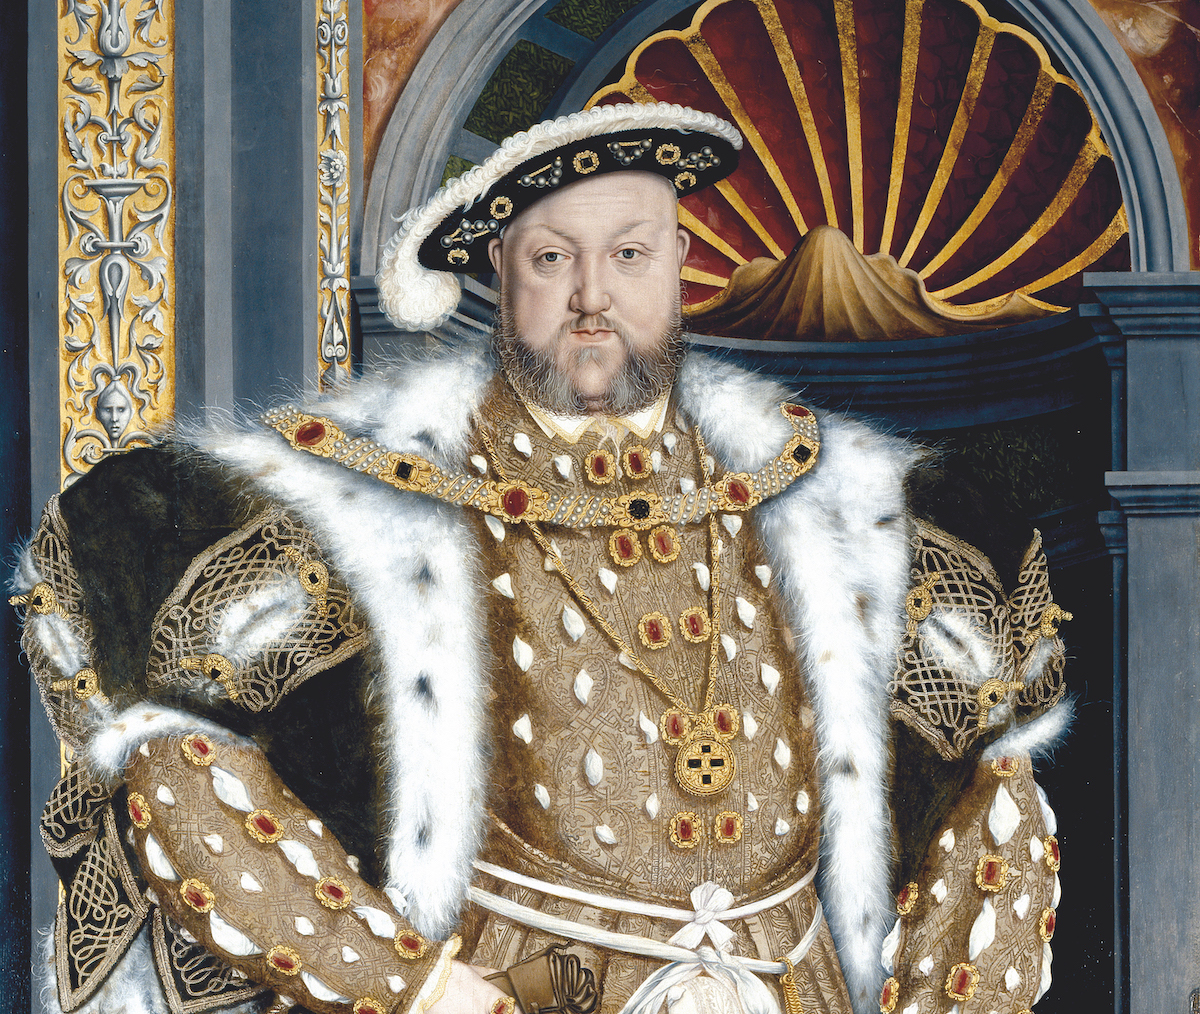 Portrait of Henry VIII, from the studio of Hans Holbein the Younger, c.1543. Bridgeman Images.